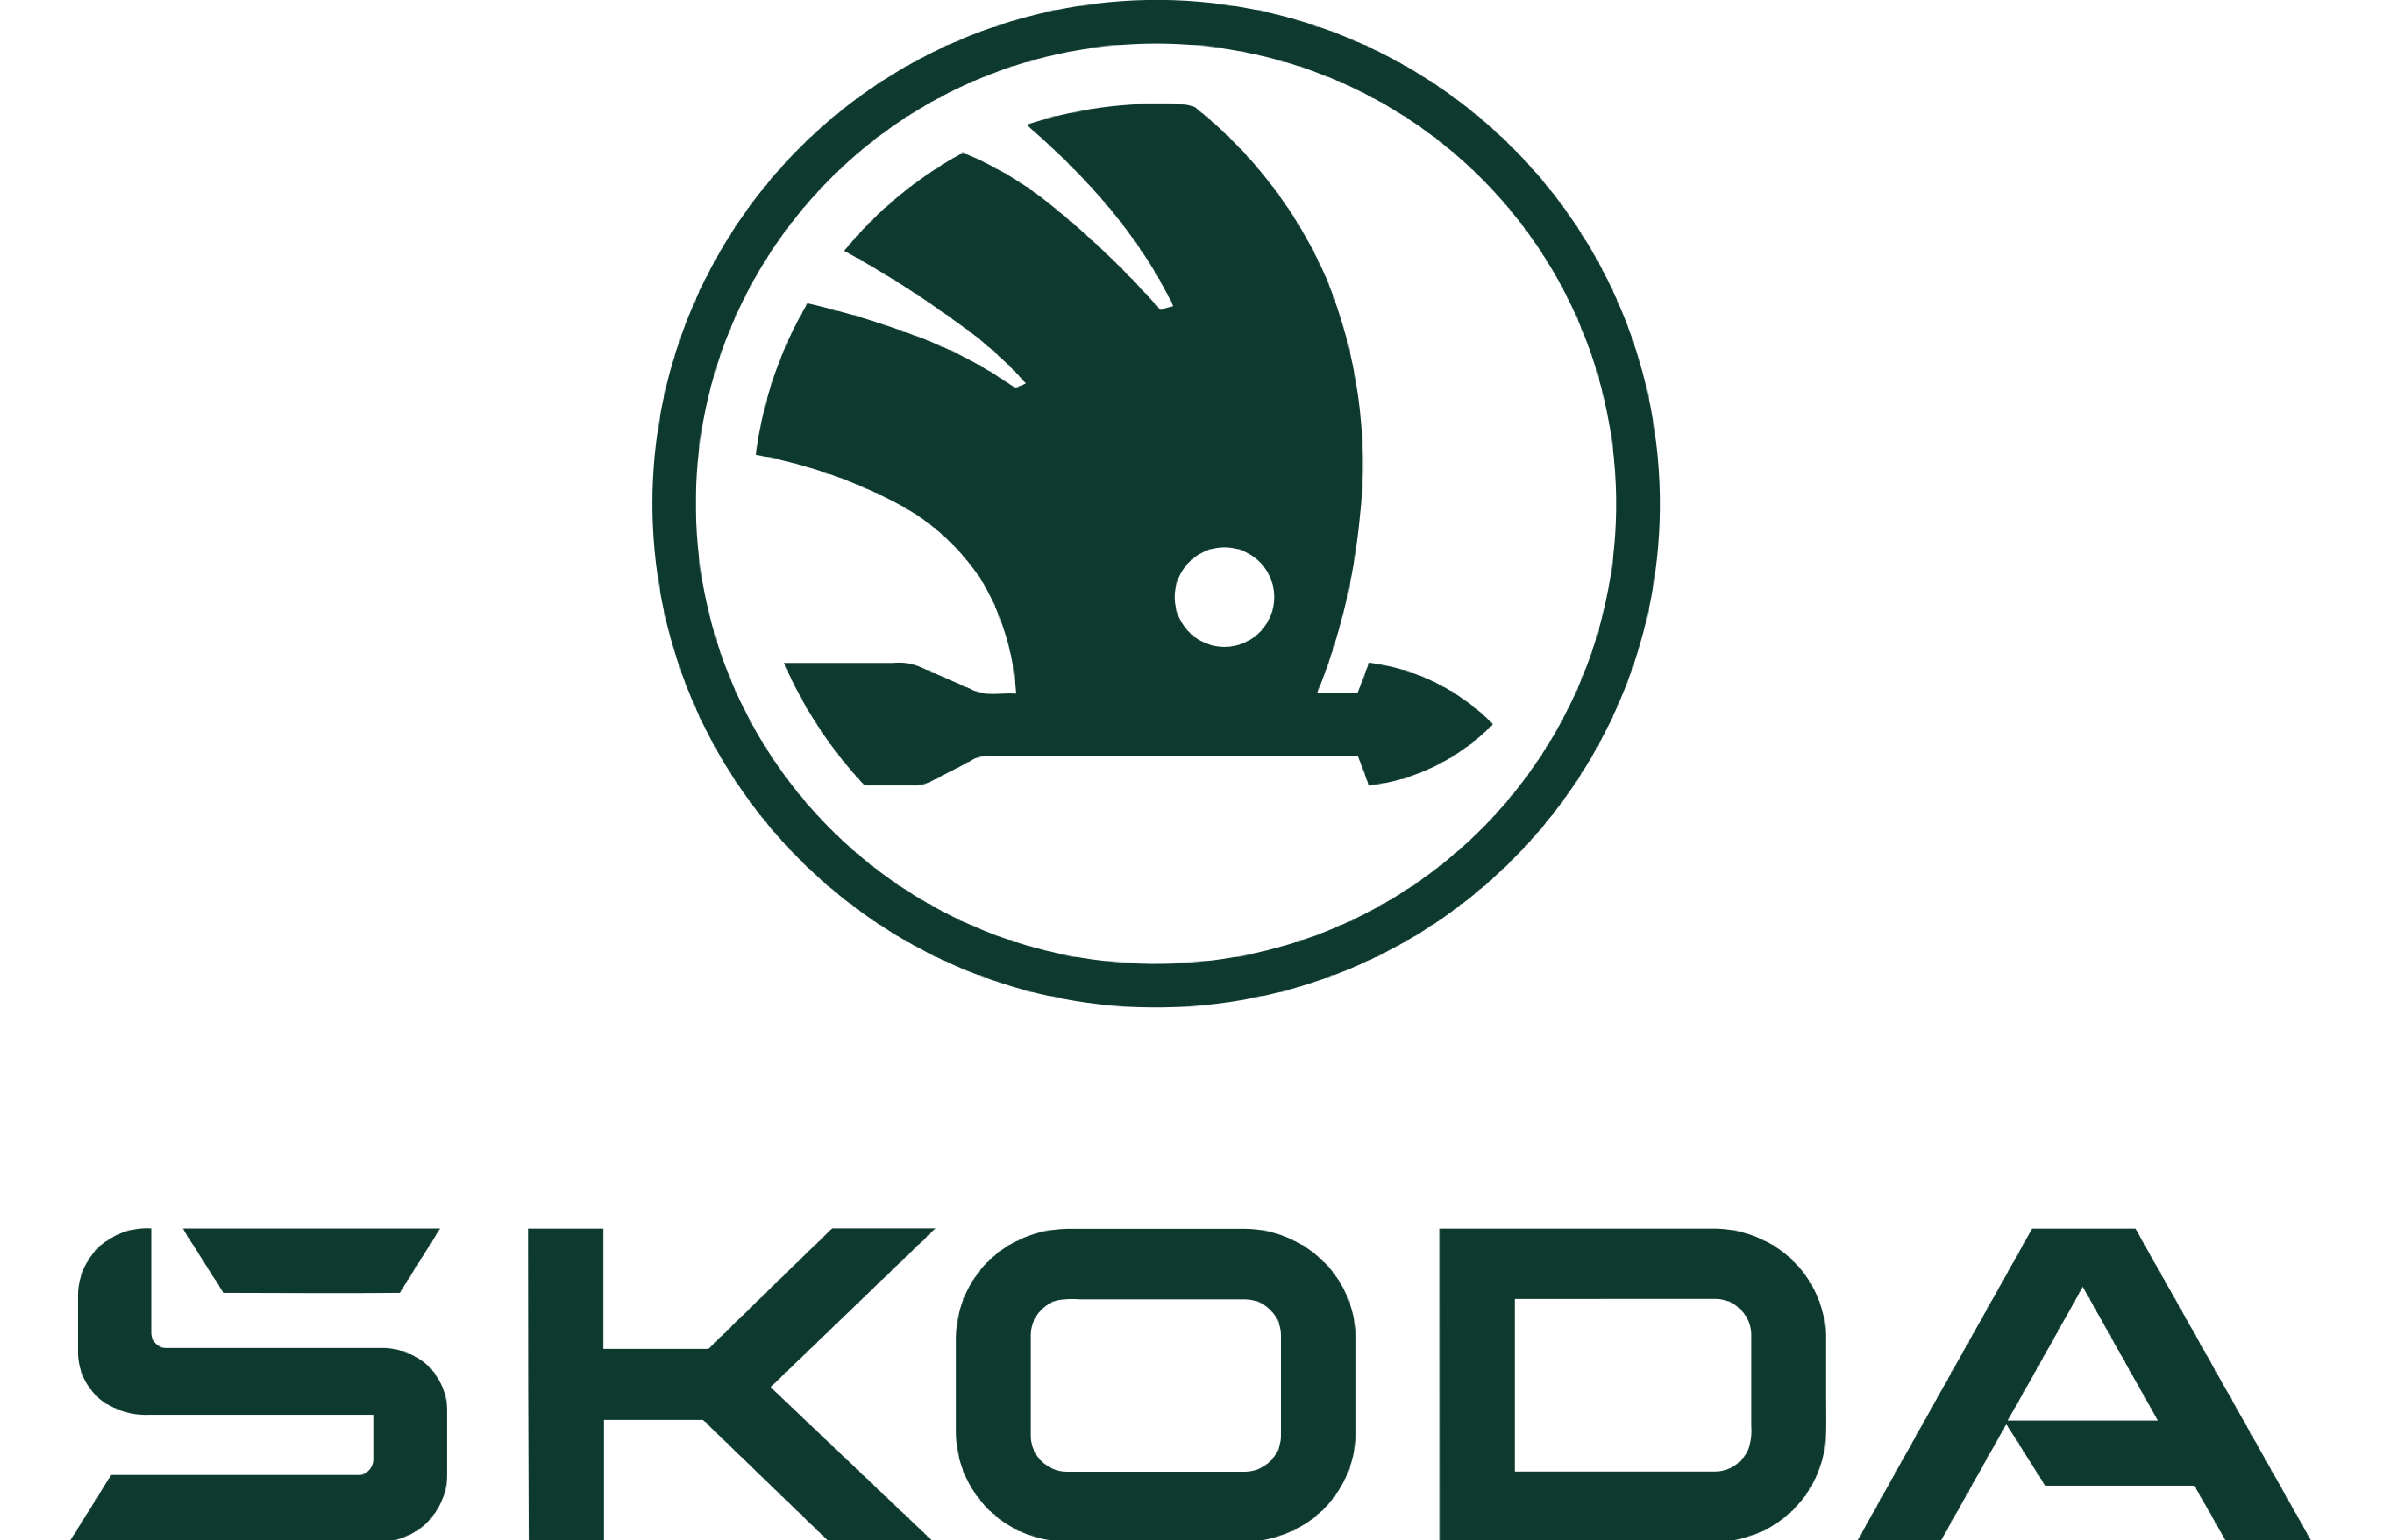 Škoda Logo - The iconic emblem representing Škoda, a renowned automobile manufacturer, known for its quality vehicles and innovation.